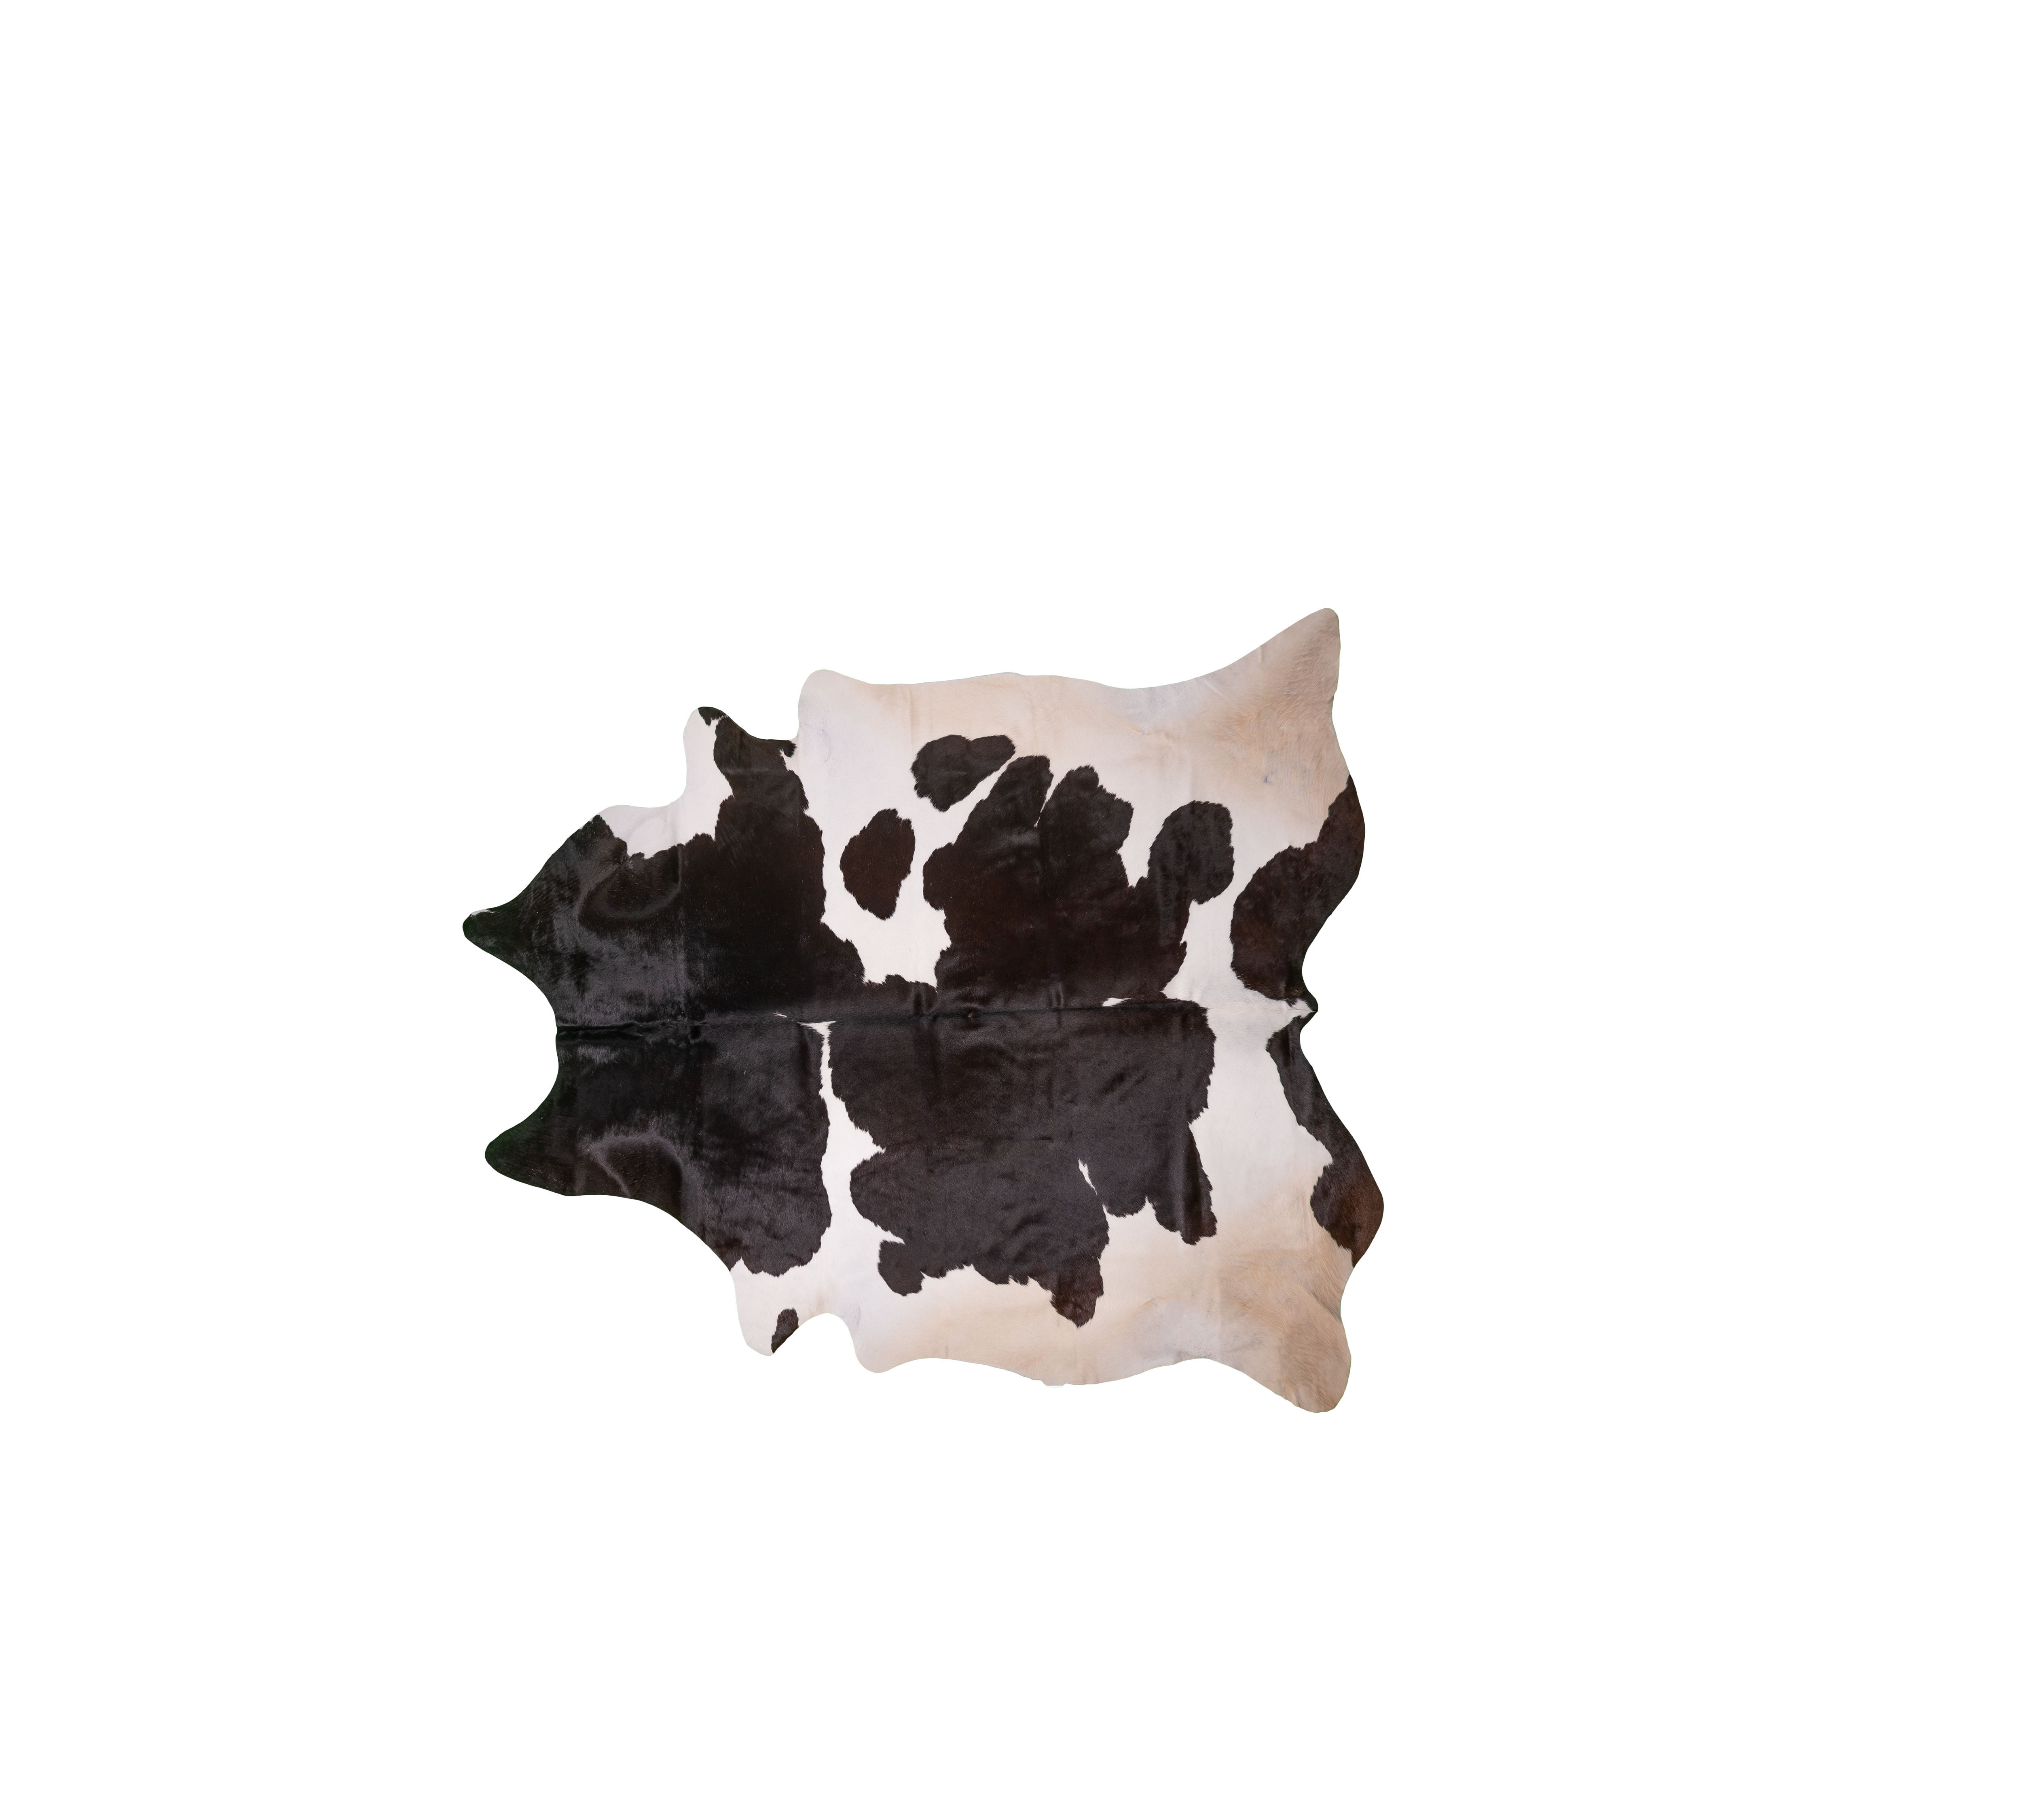 Cowhide, Black-and-White 3-4 m²